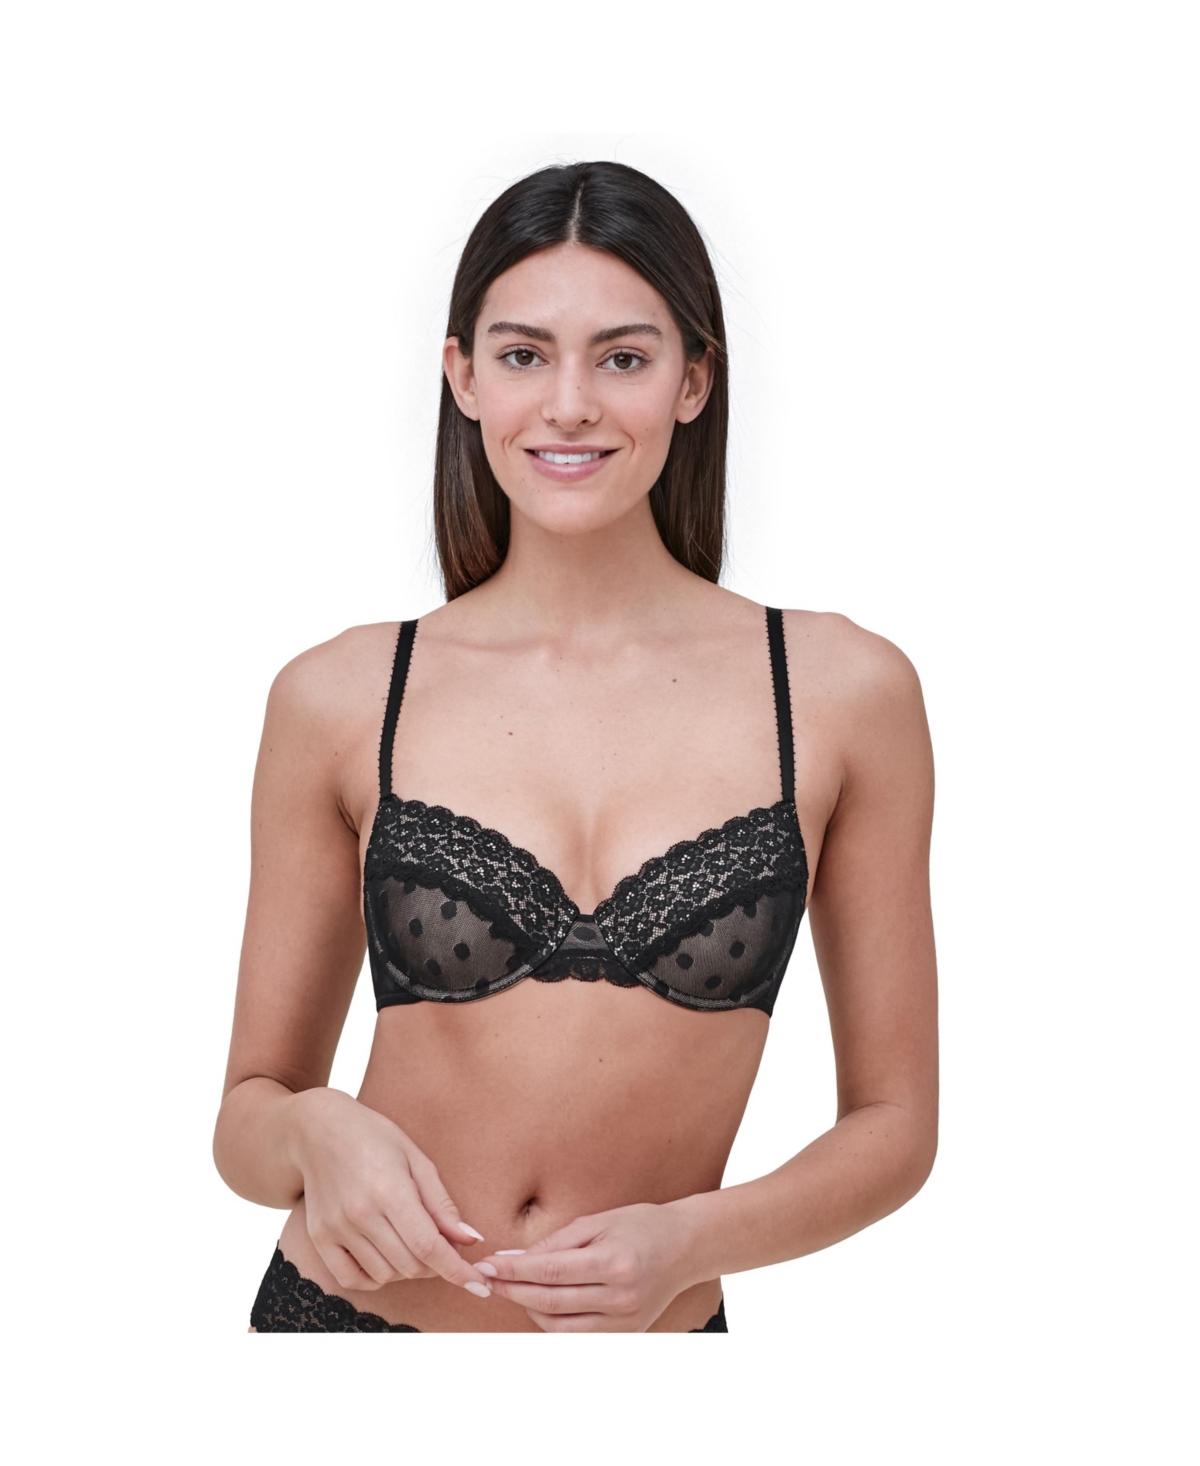 SKARLETT BLUE DNU WOMEN'S DARE FULLY ADJUSTABLE COMFORTABLE EVERYDAY DEMI T SHIRT BRA WITH DOTTED STRETCH LACE AND